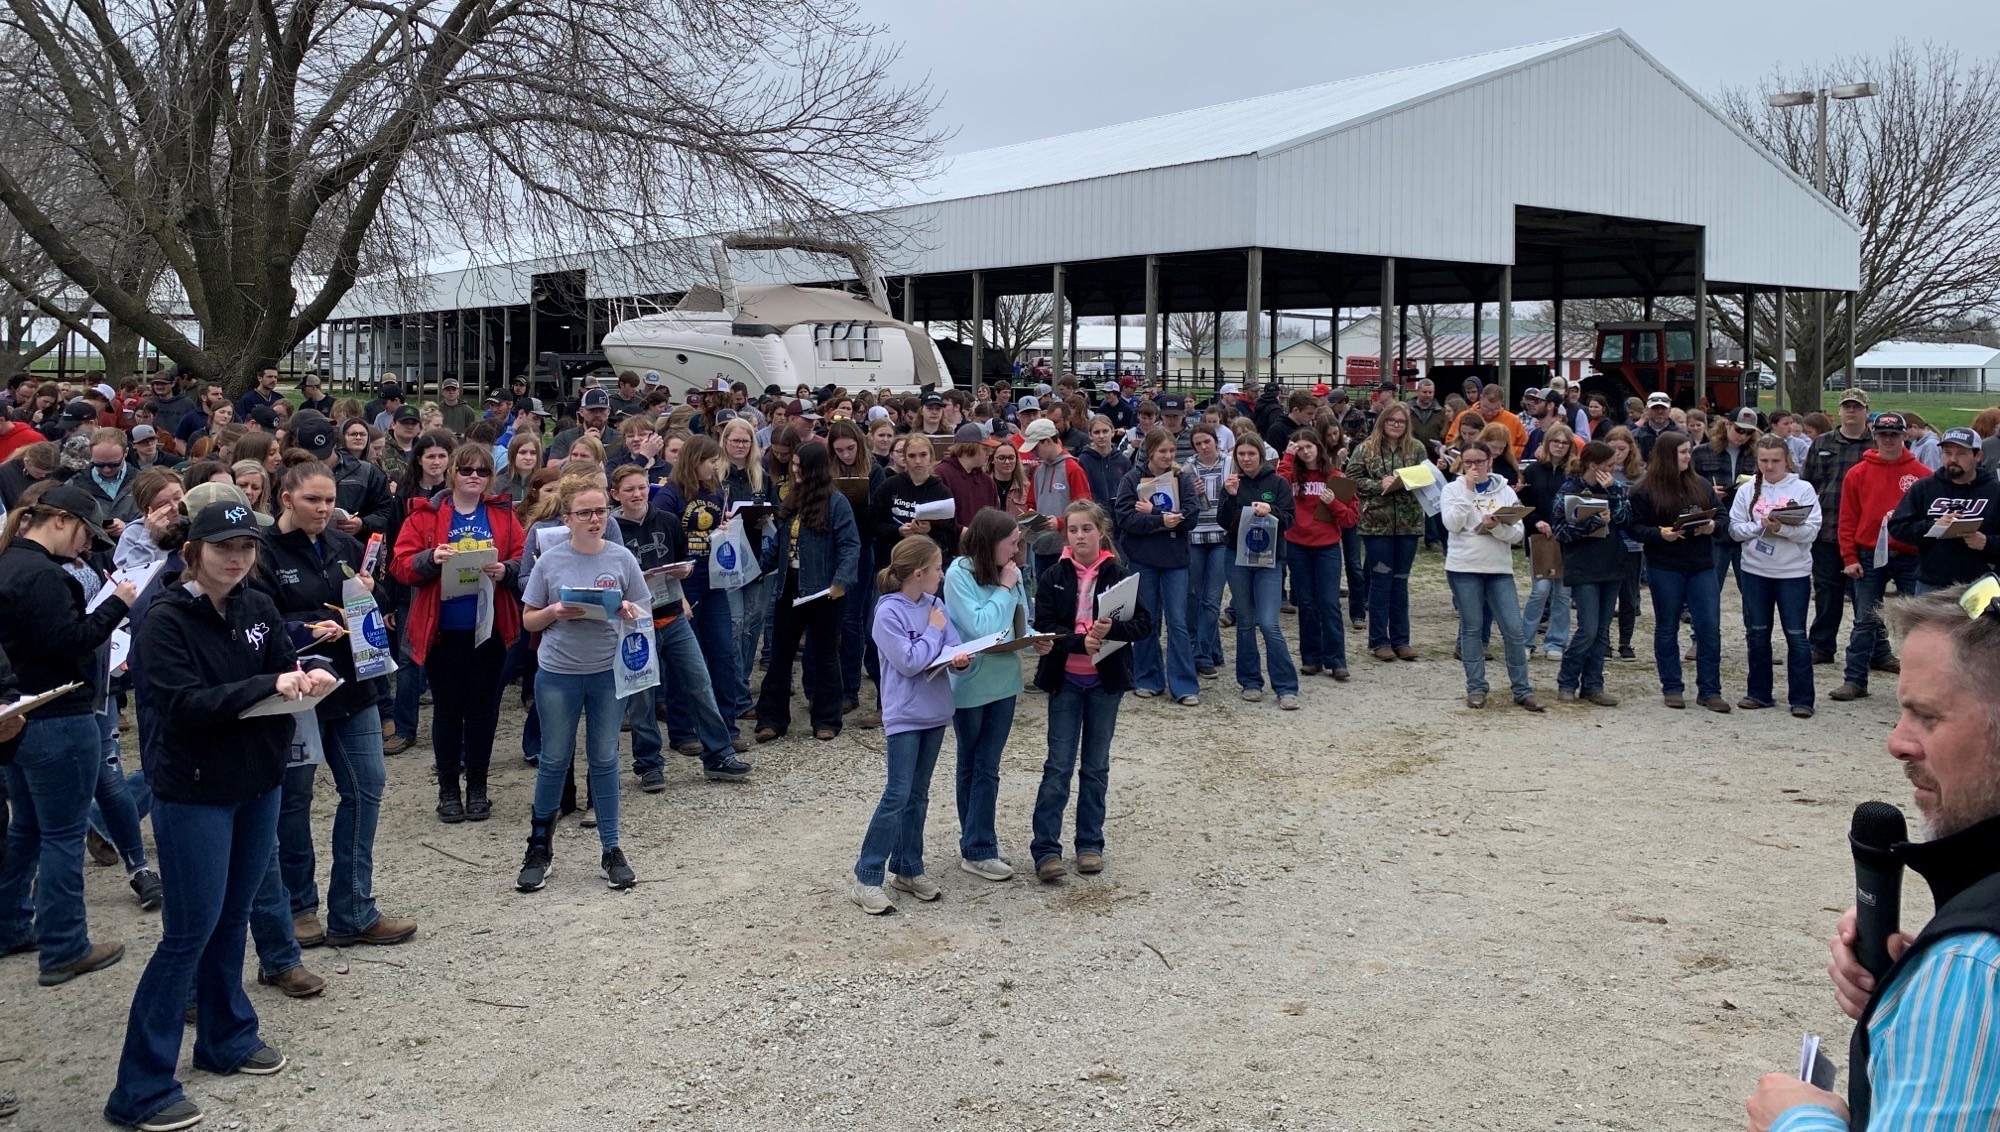 Many students gathered outside for the LLCC Livestock Judging Contest